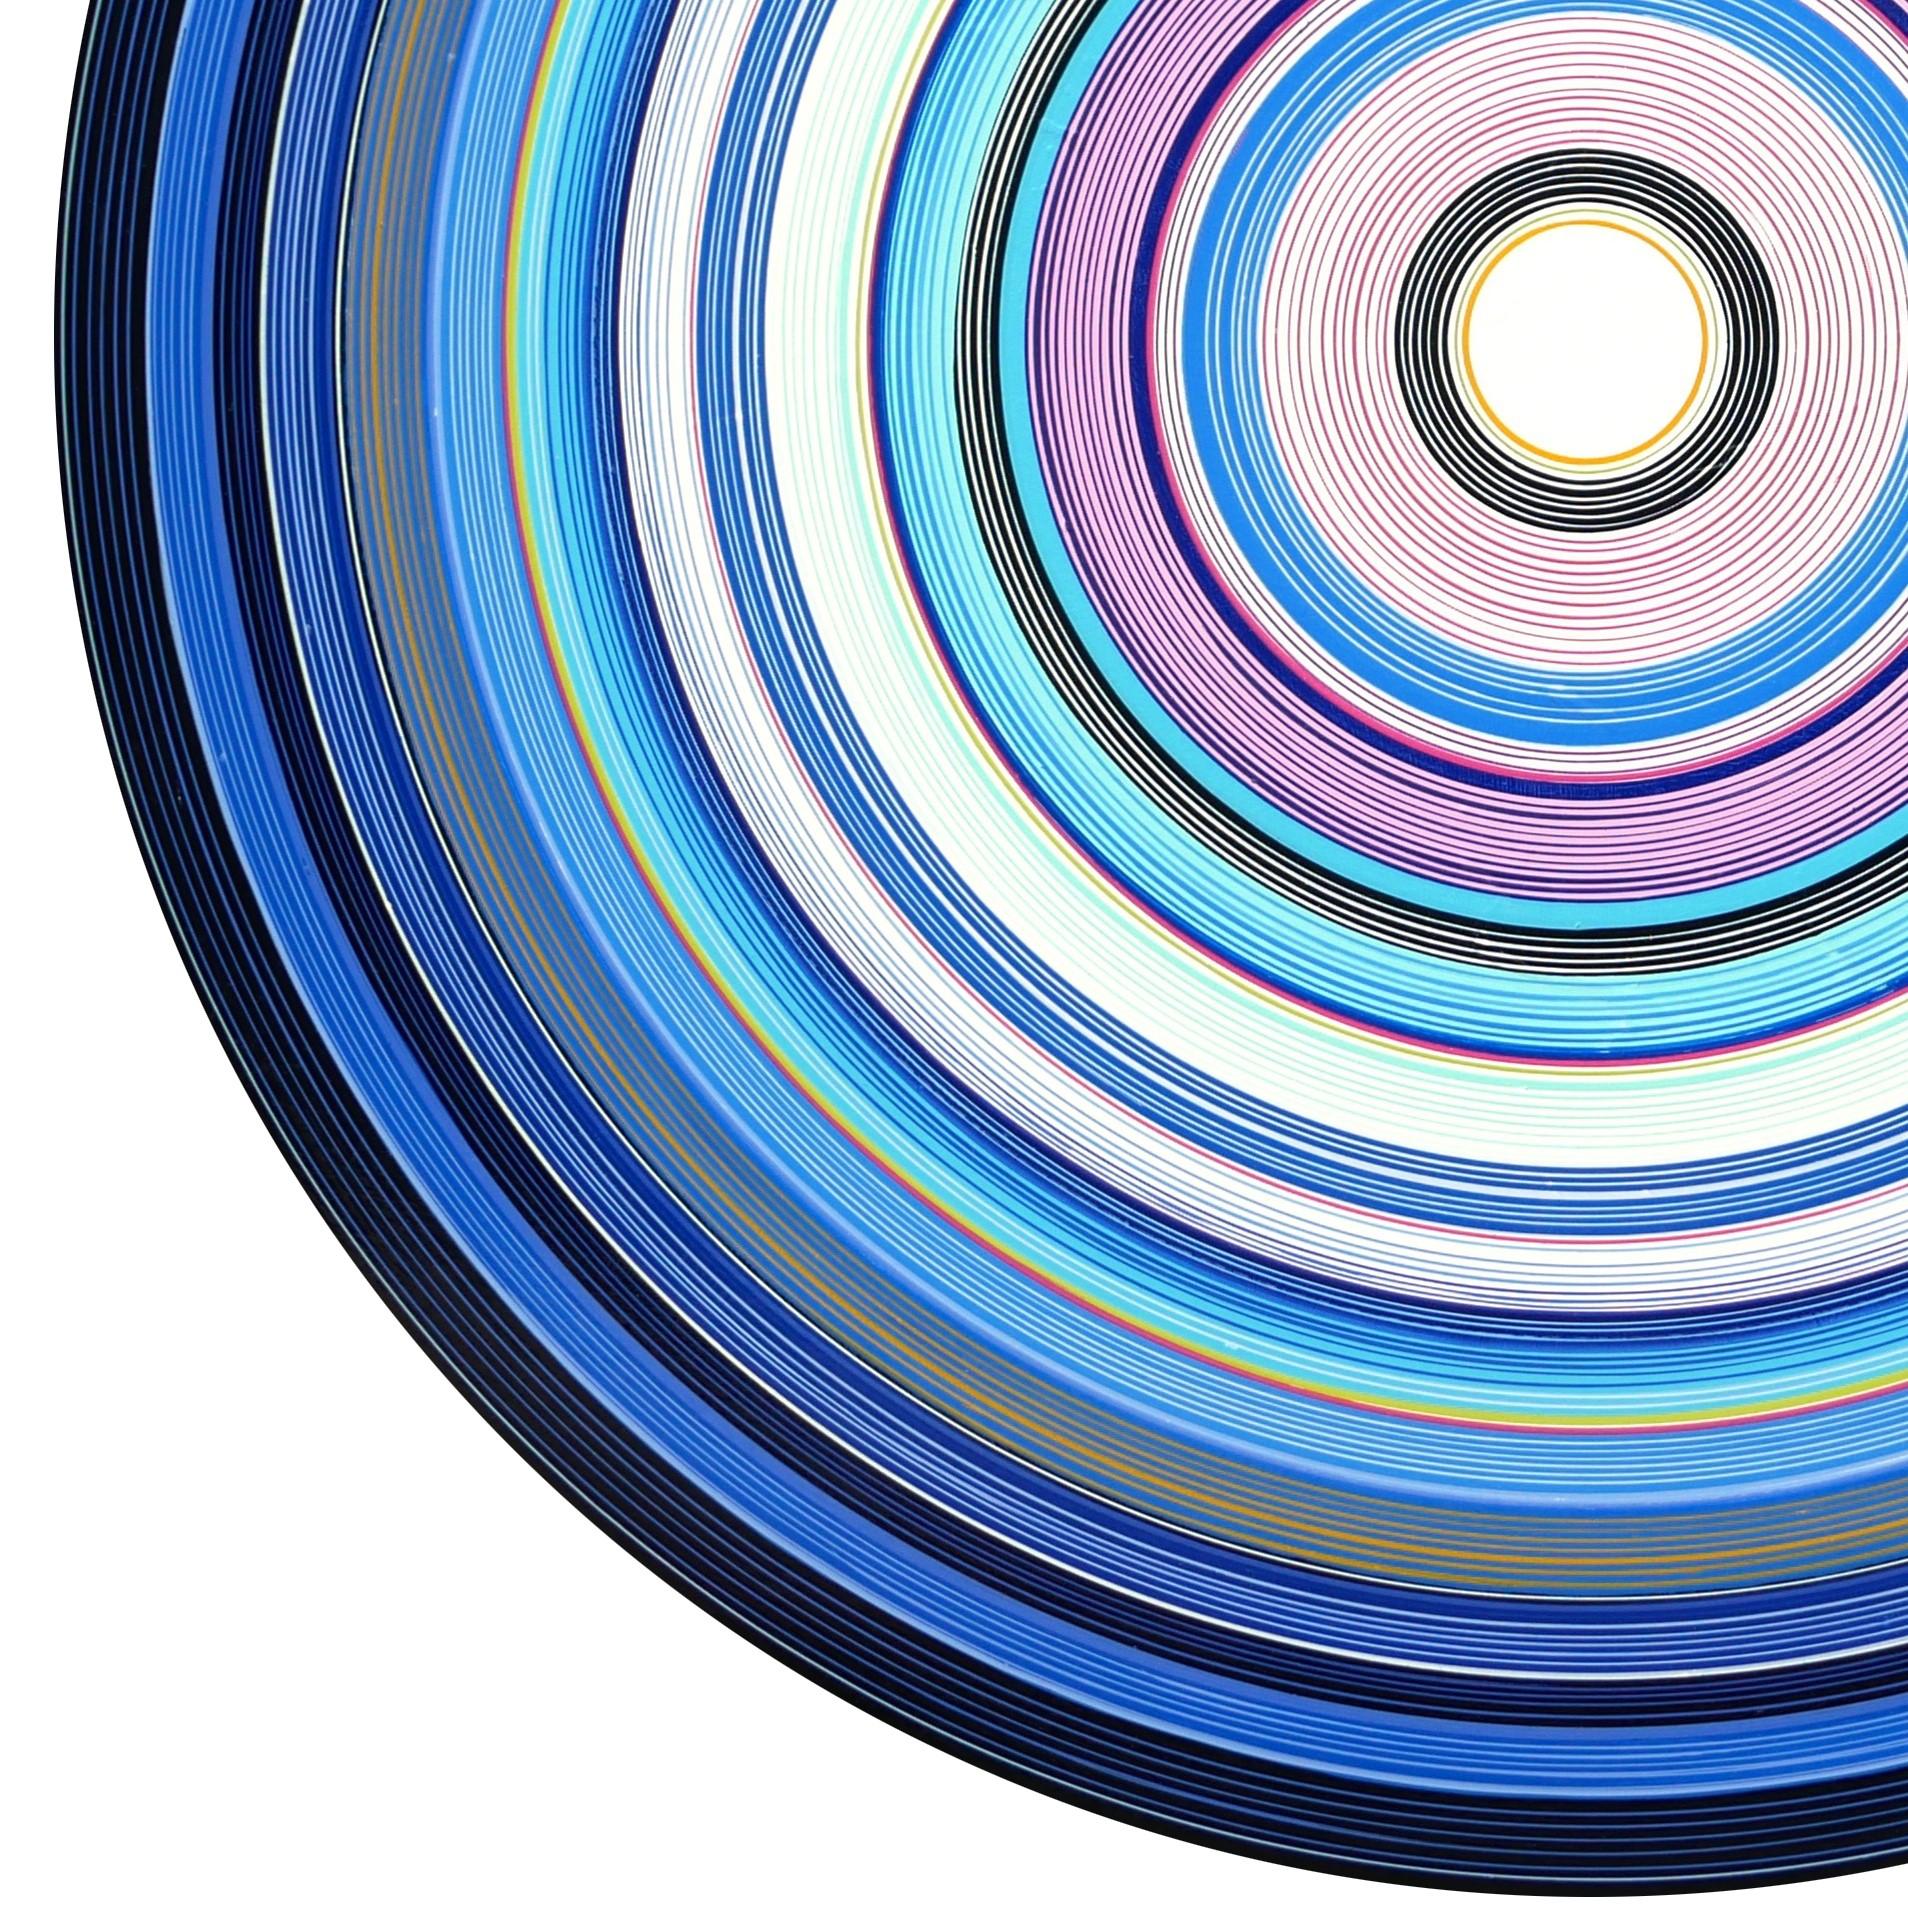 Colorful abstract contemporary circular painting by Houston, TX artist David Hardaker. This painting features various rings of bright navy, blue, and pink tones. Signed, titled, and dated by the artist on the reverse. Currently unframed but framing